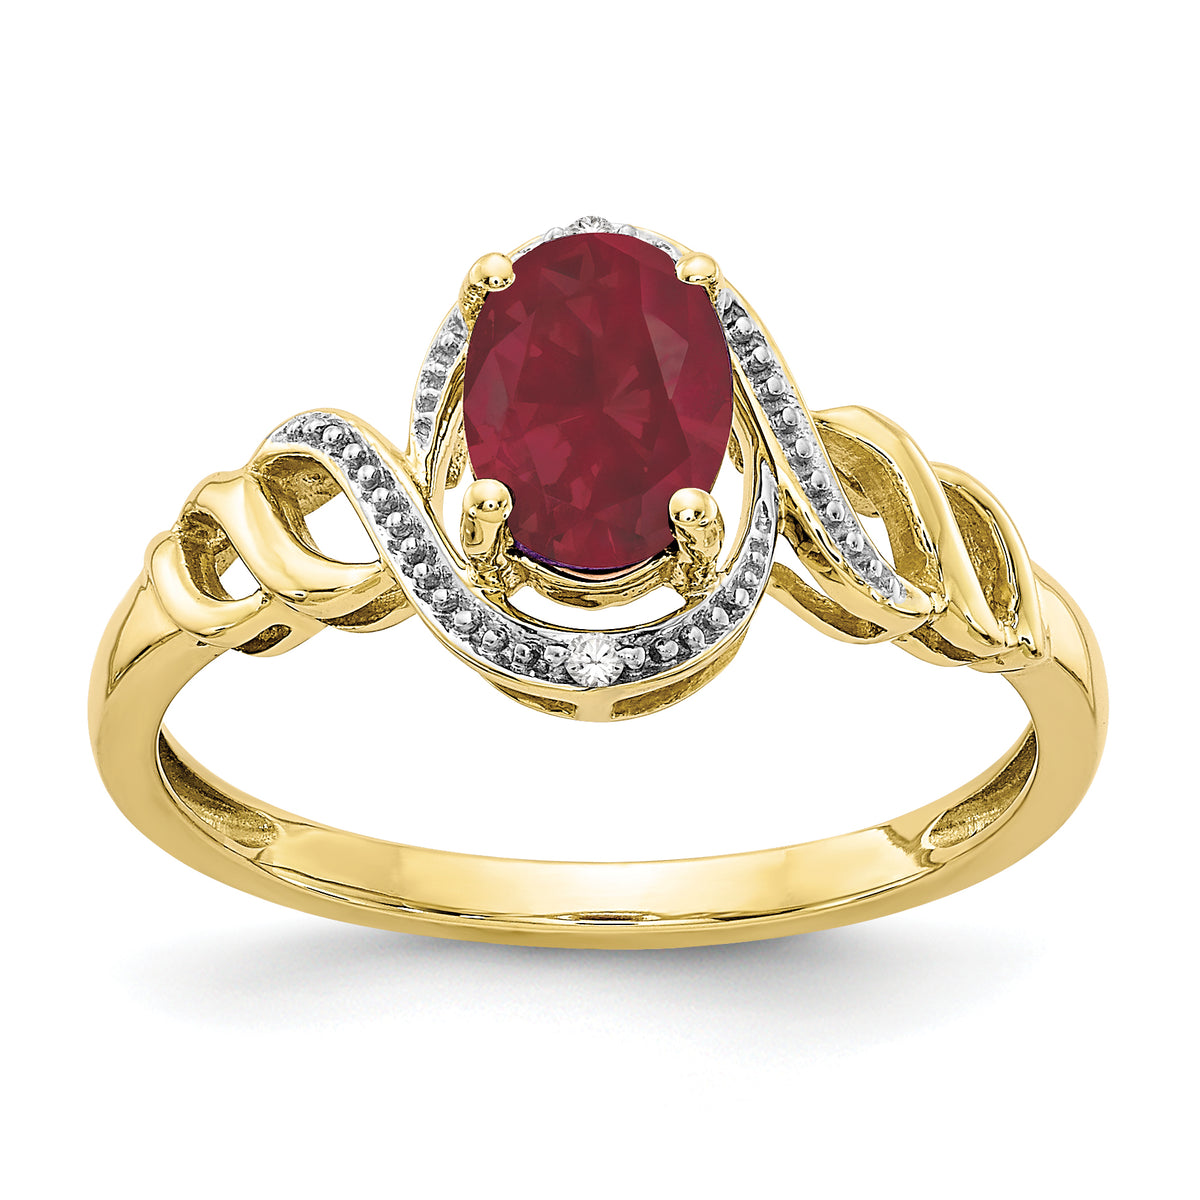 10K Ruby and Diamond Ring